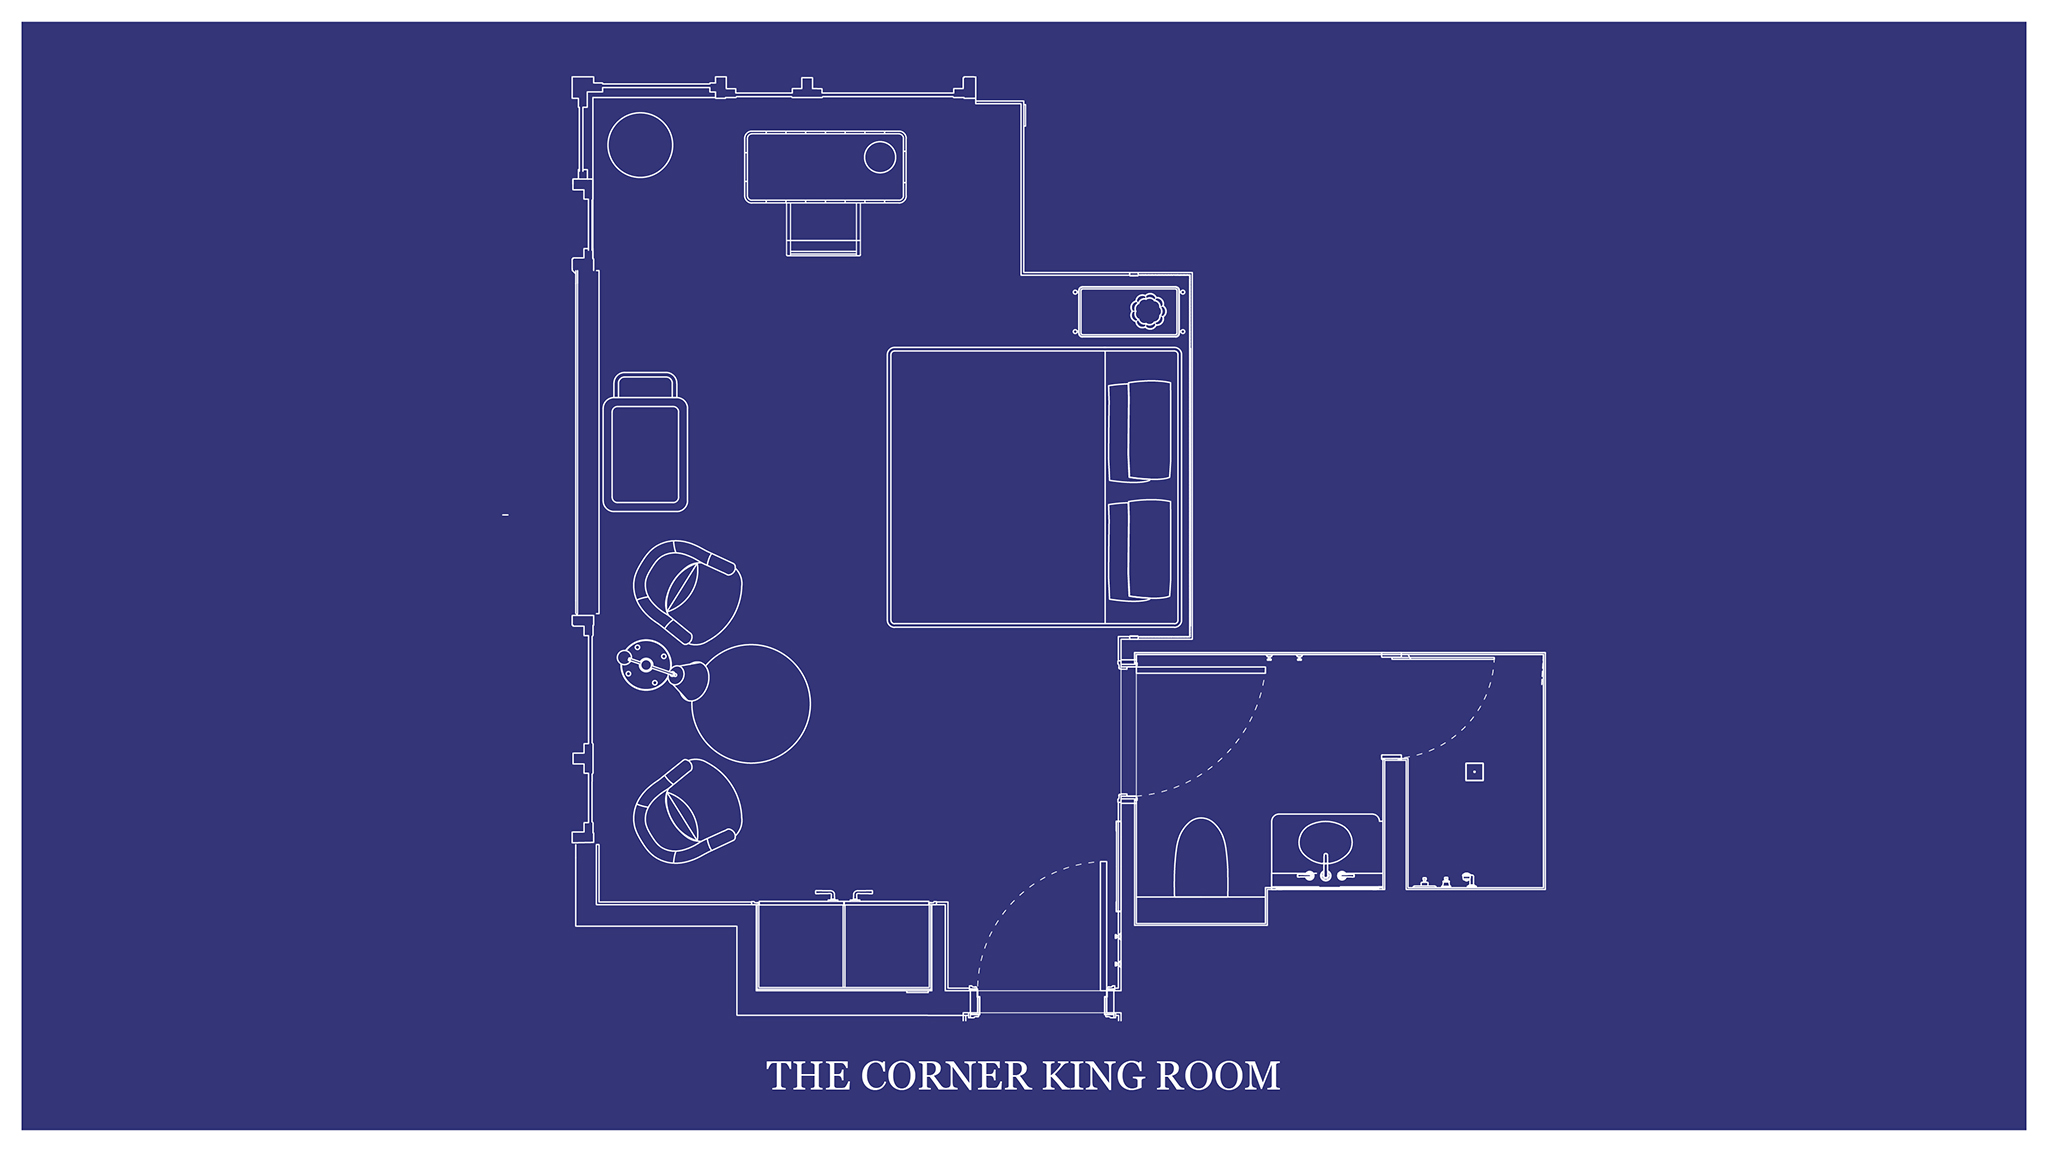 The architectural layout of "THE CORNER KING ROOM" is depicted on a blueprint map.